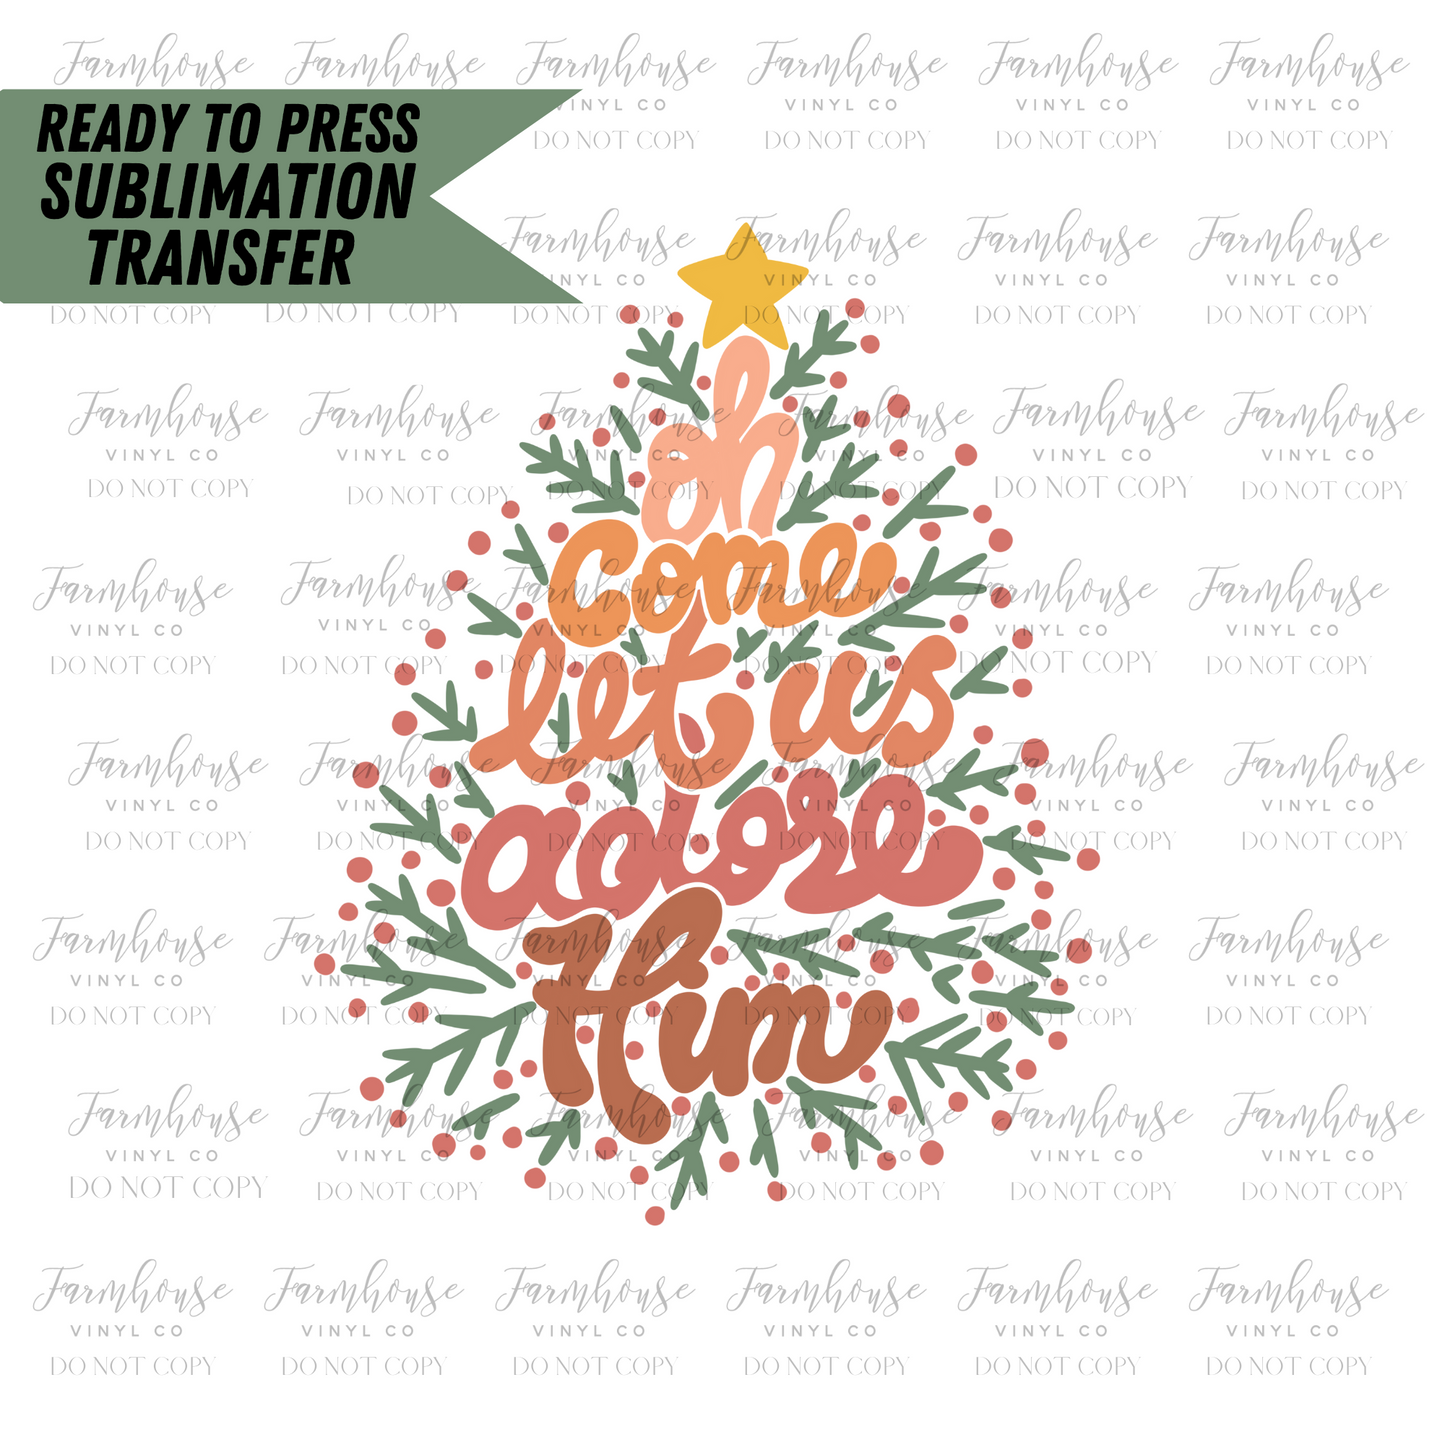 Oh Come Let Us Adore Him Ready To Press Sublimation Transfer - Farmhouse Vinyl Co